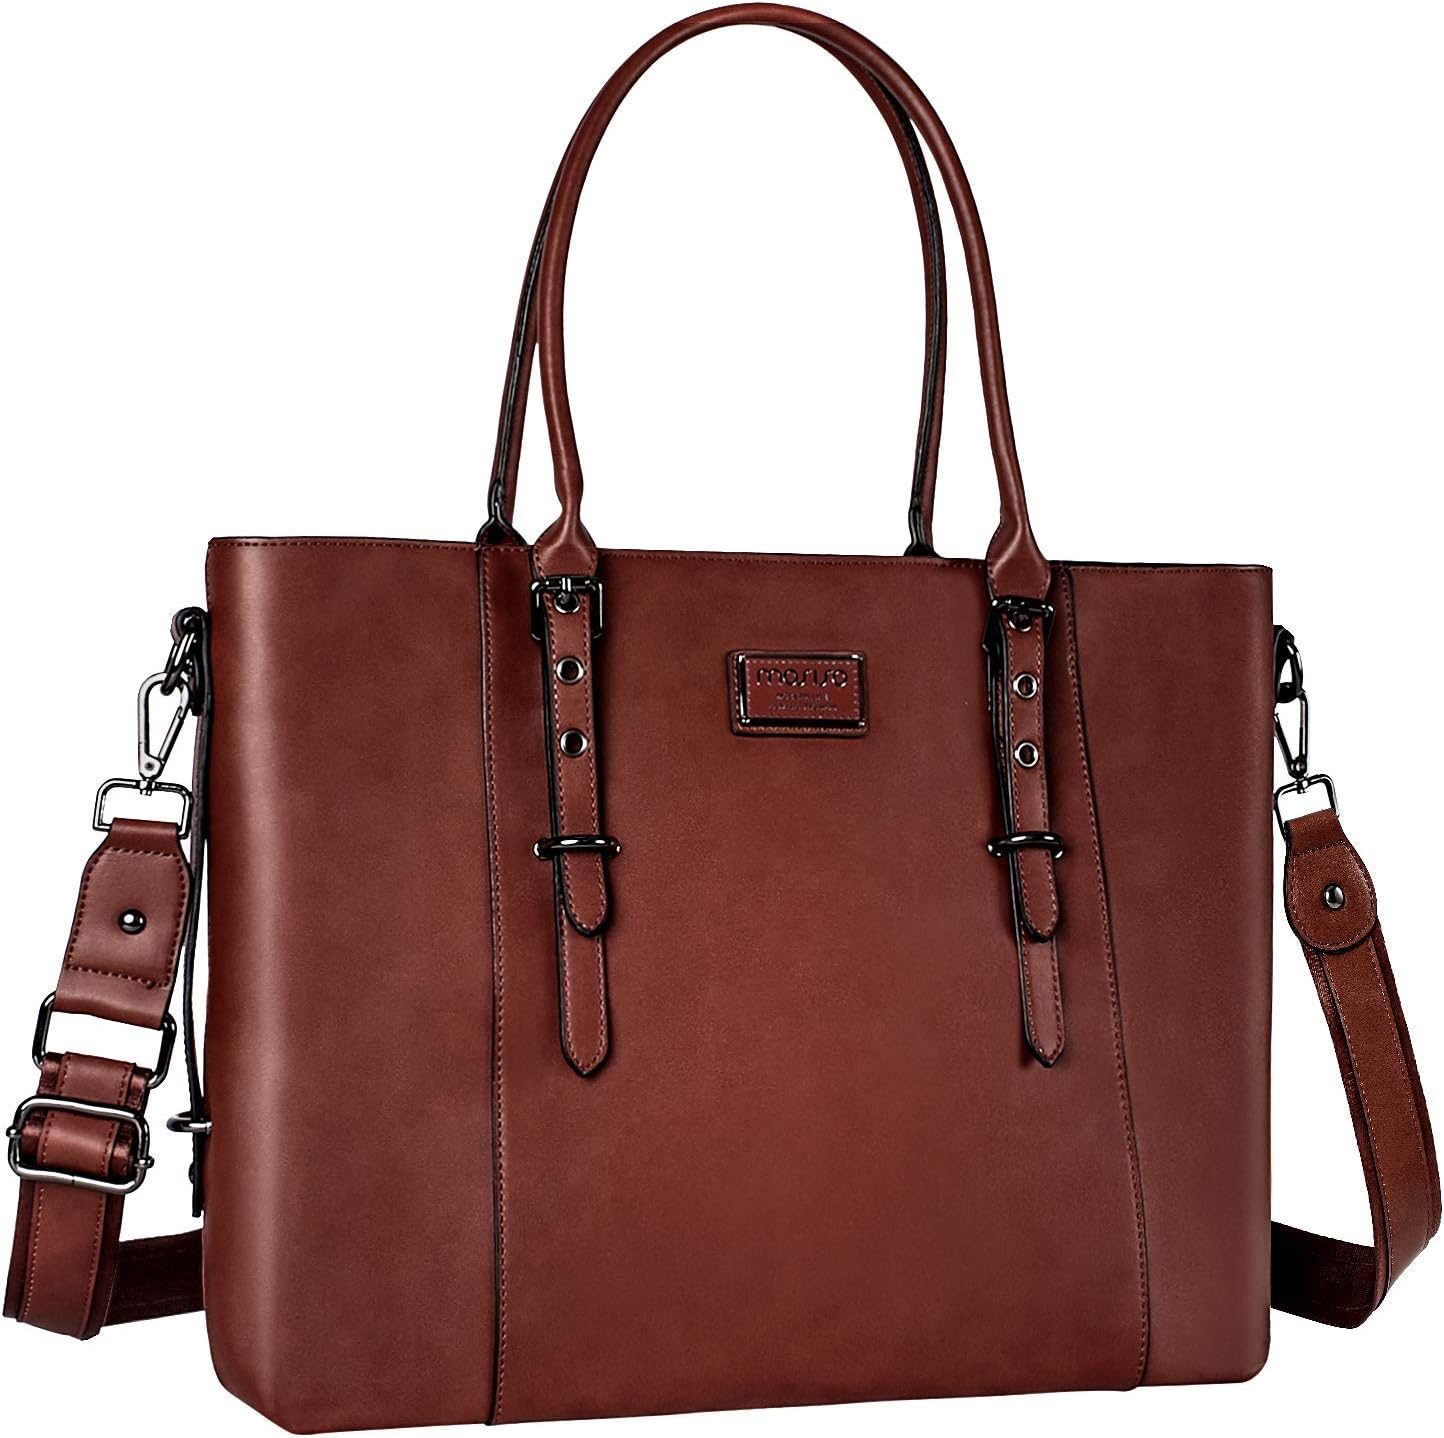 LeatherBag for Women Laptop Tote Bag